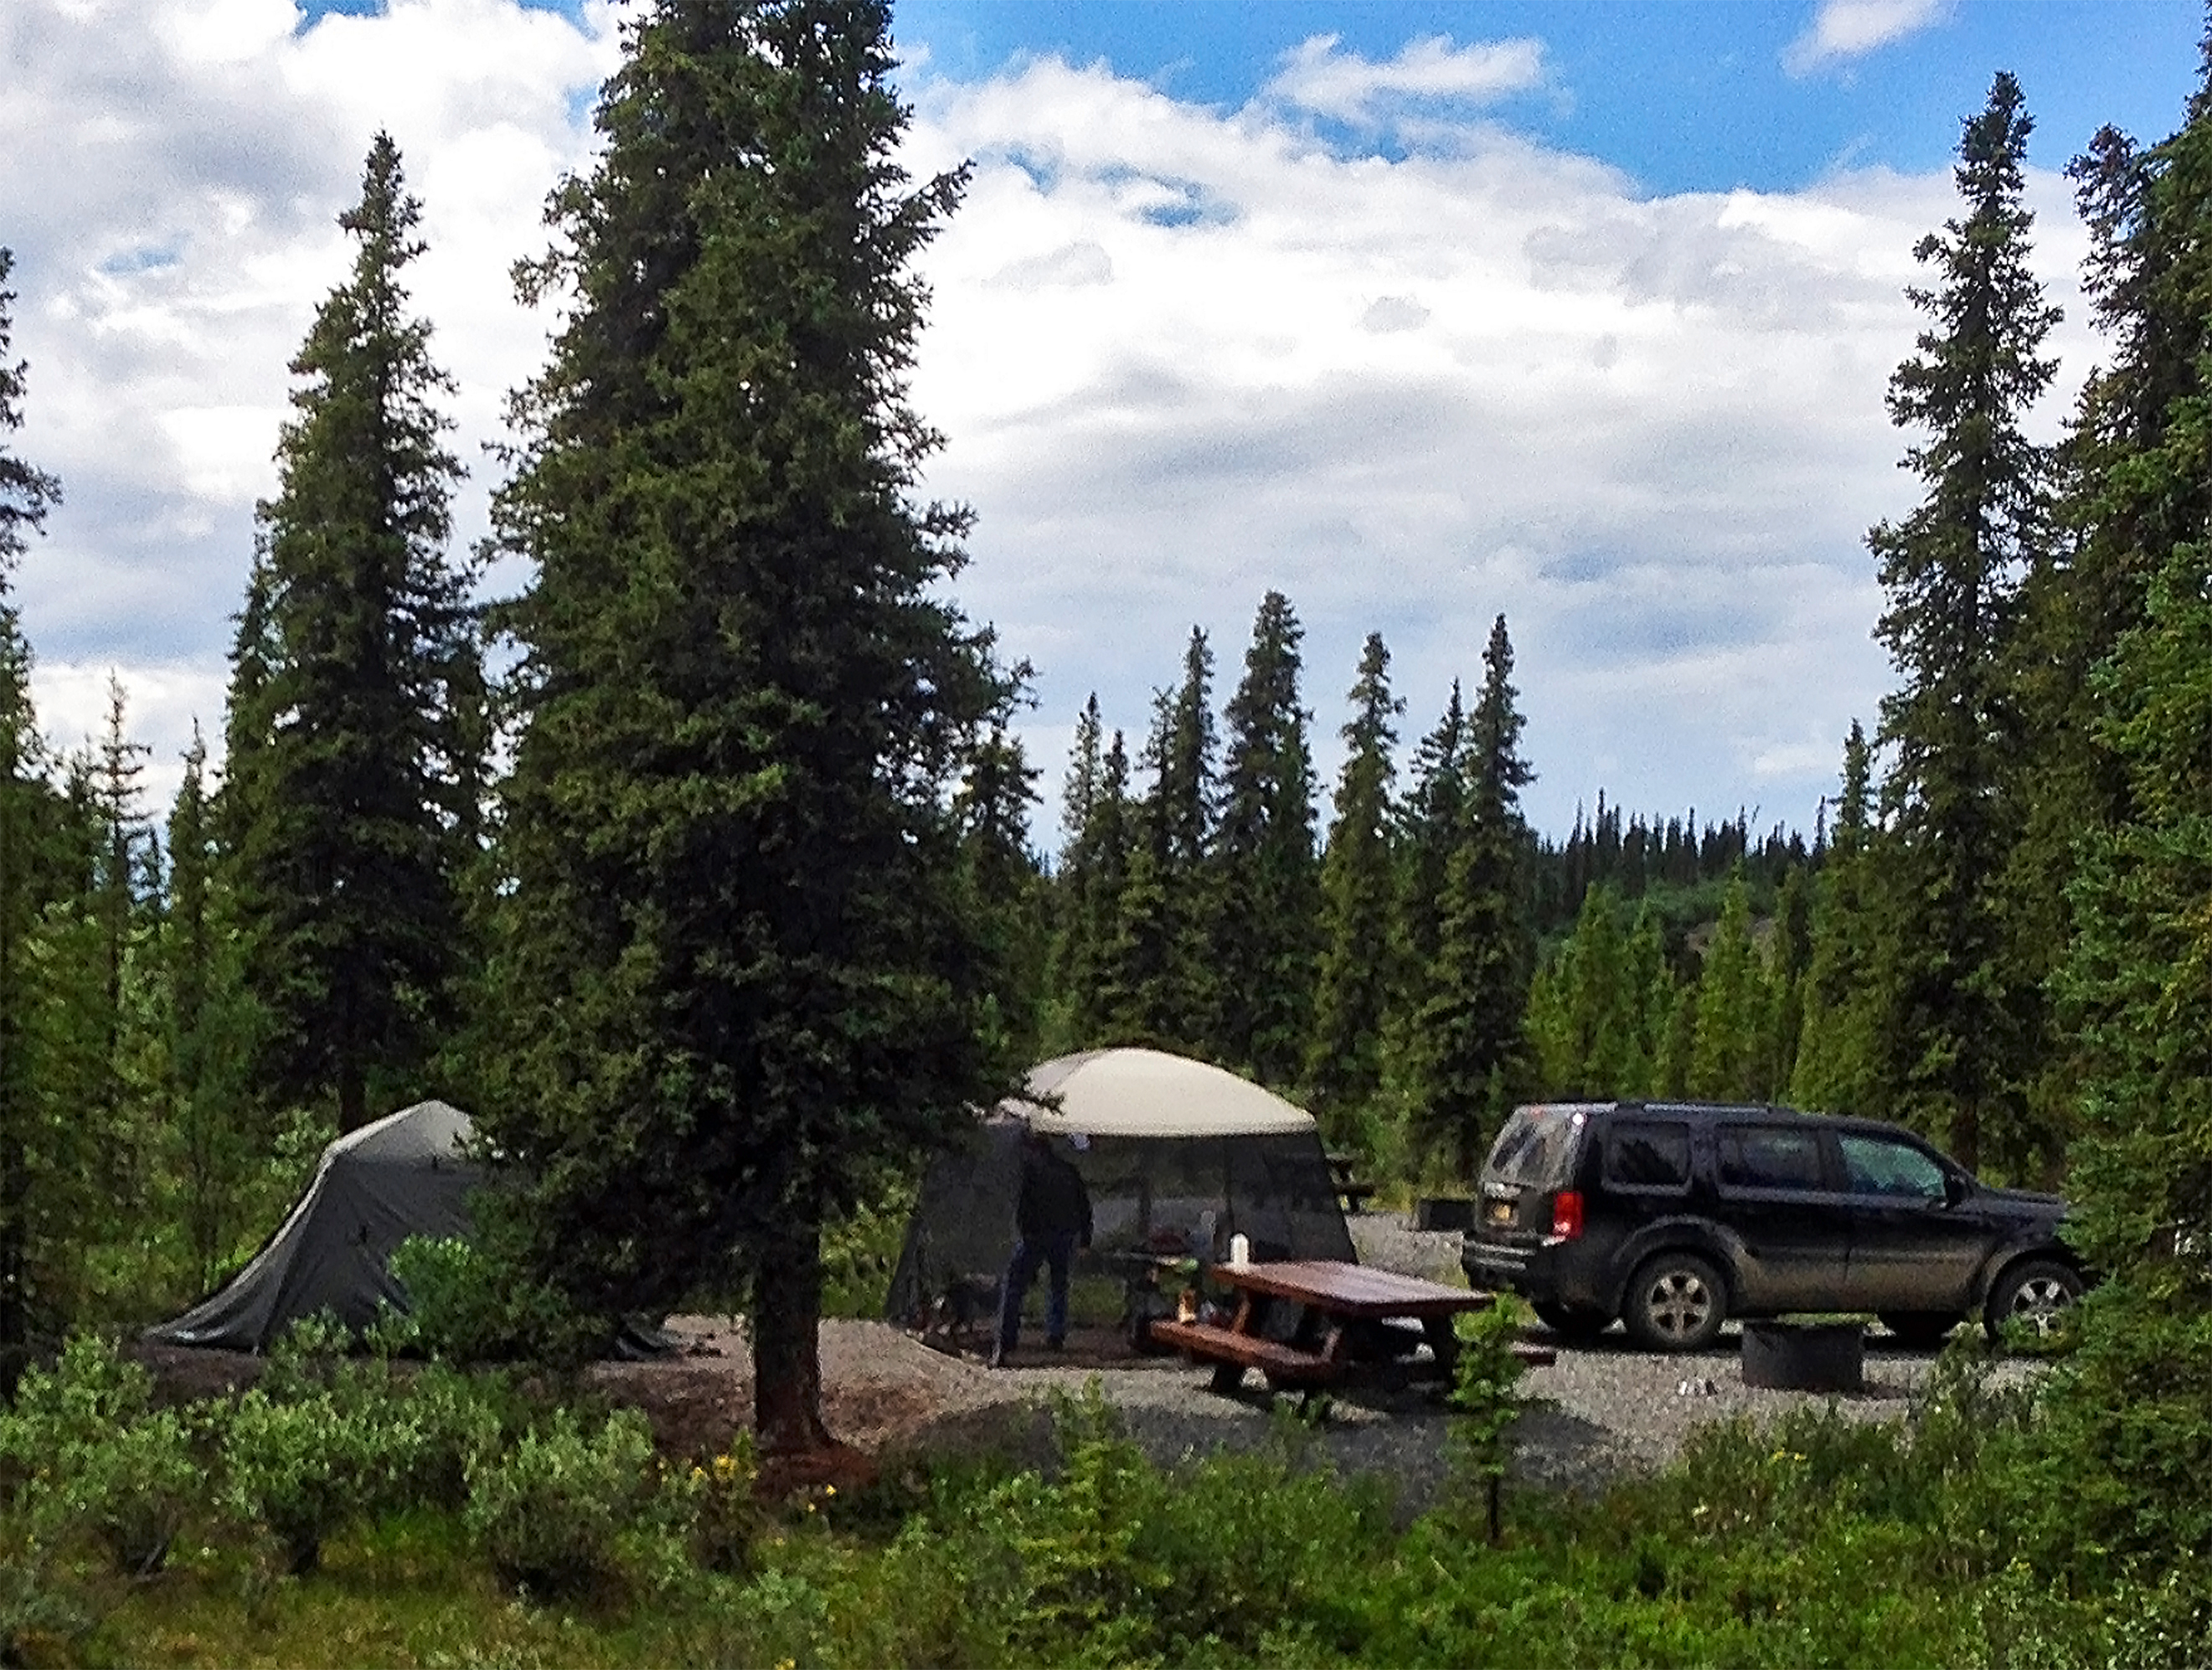 Campsite in the forest with tents, picnic table, and vehicle.